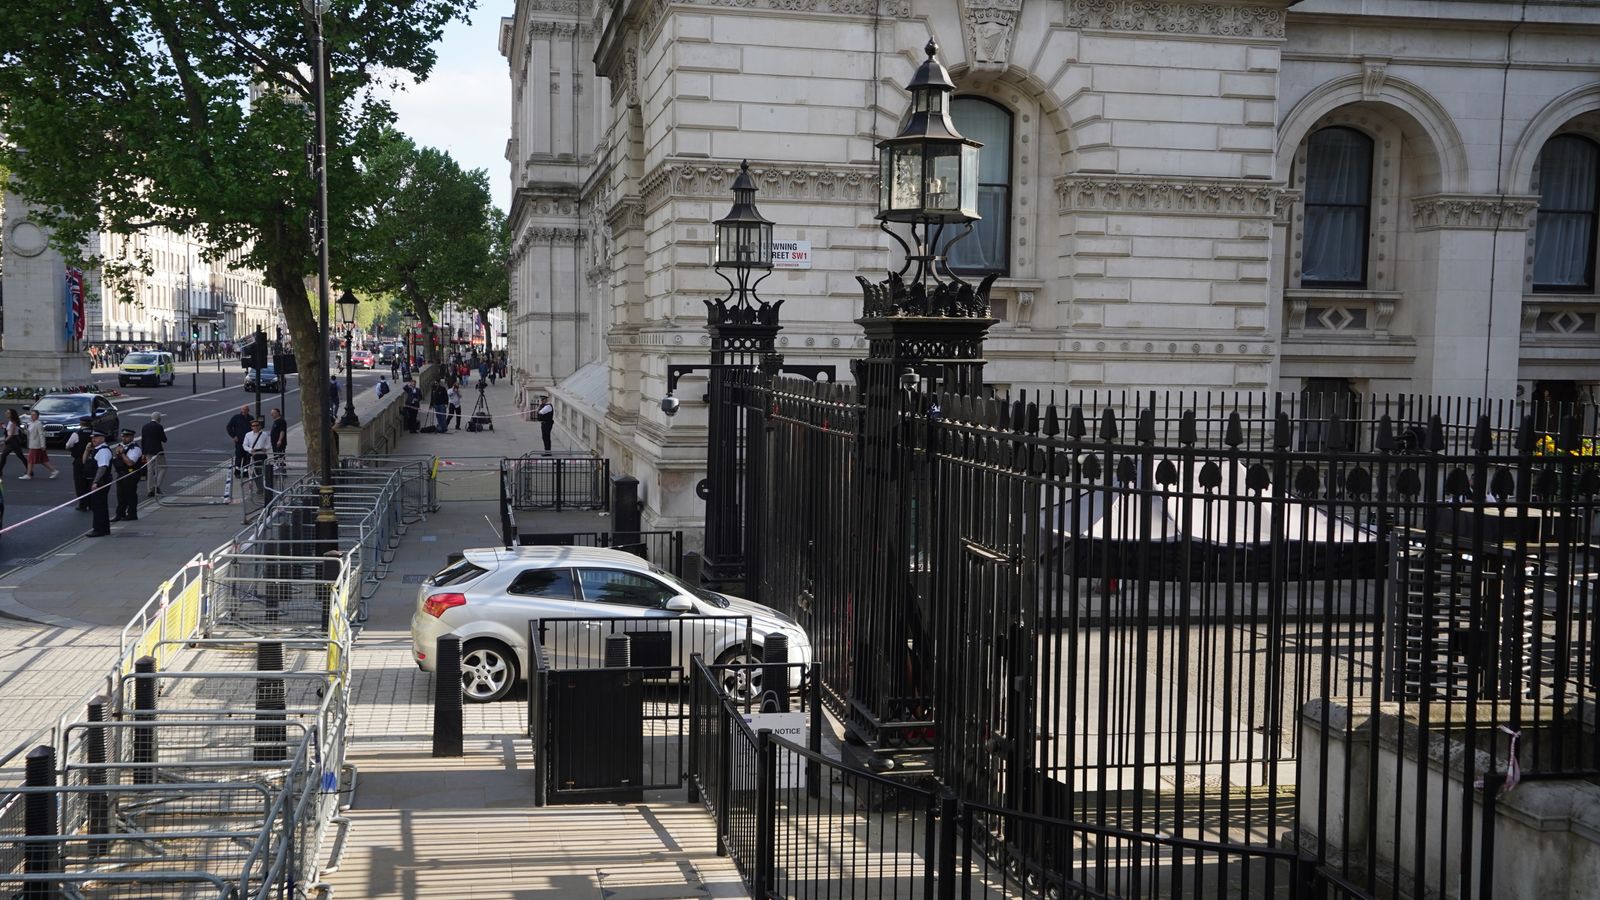 Car crash: What is security like at Downing Street?